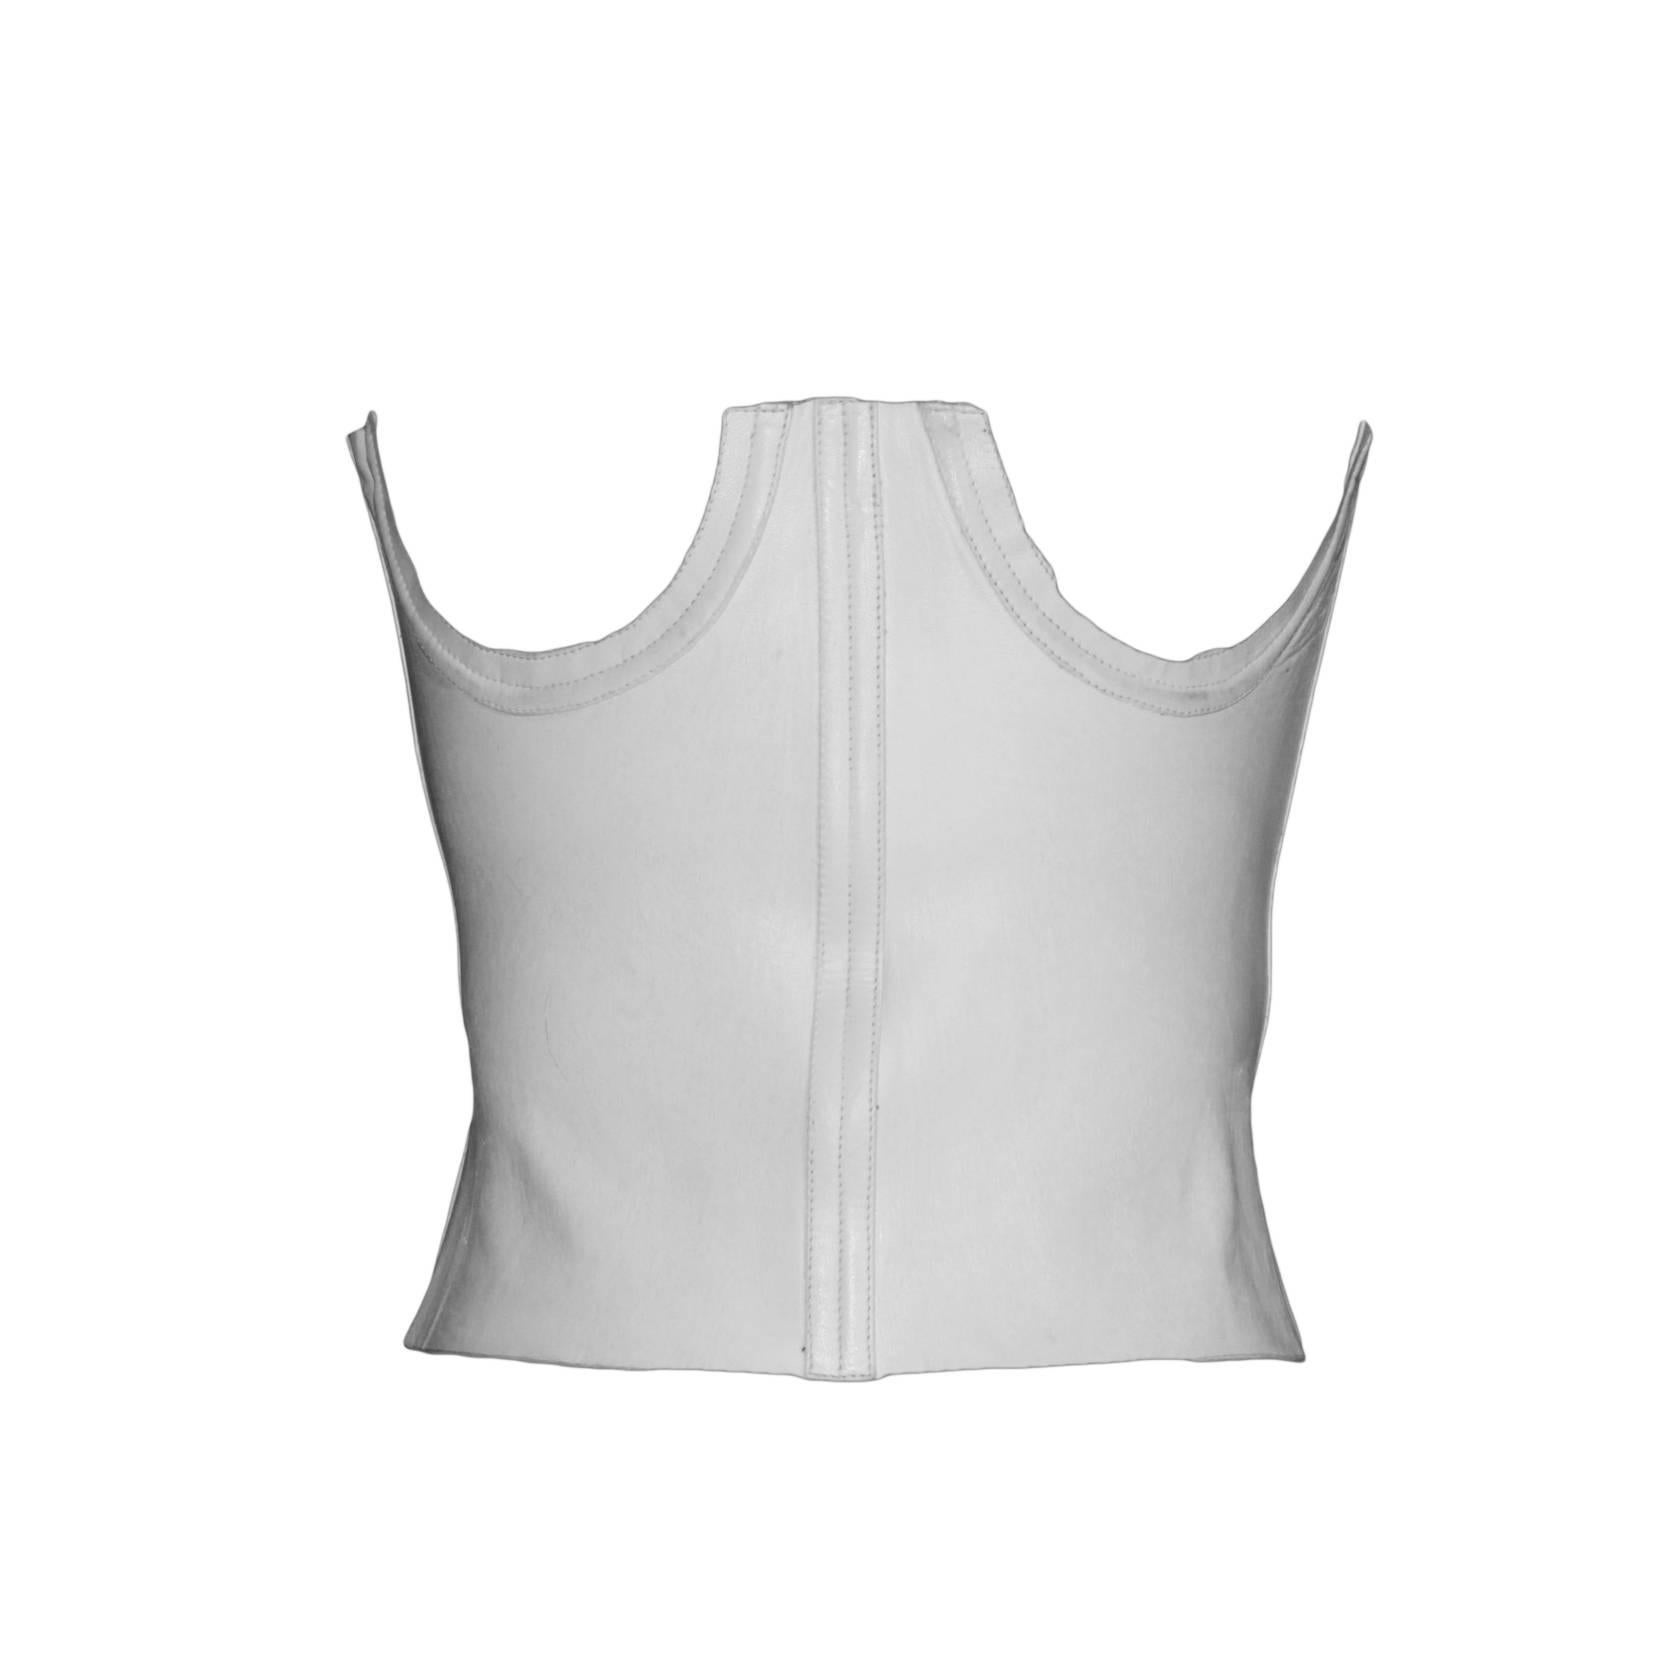 Iconic Tom Ford Gucci 2001 Runway Collection White Leather Under-bodice Corset!